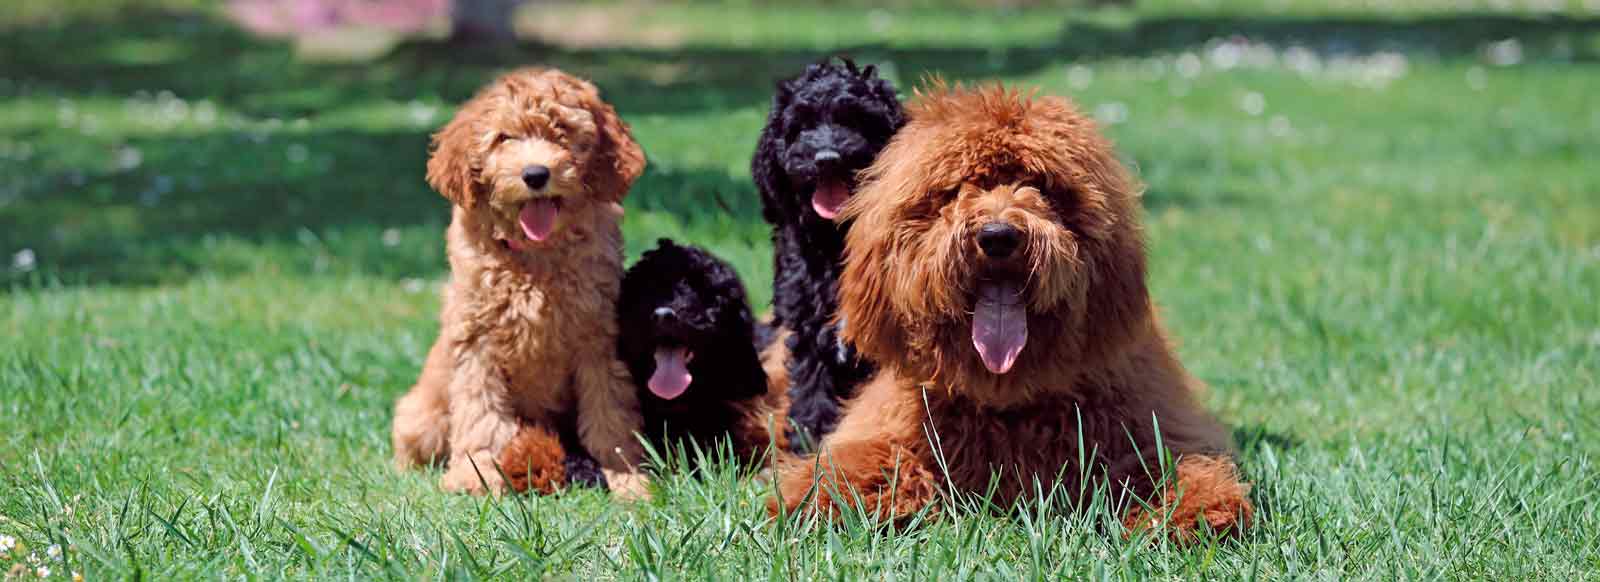 dogs and puppies in the park, on the grass, in nature